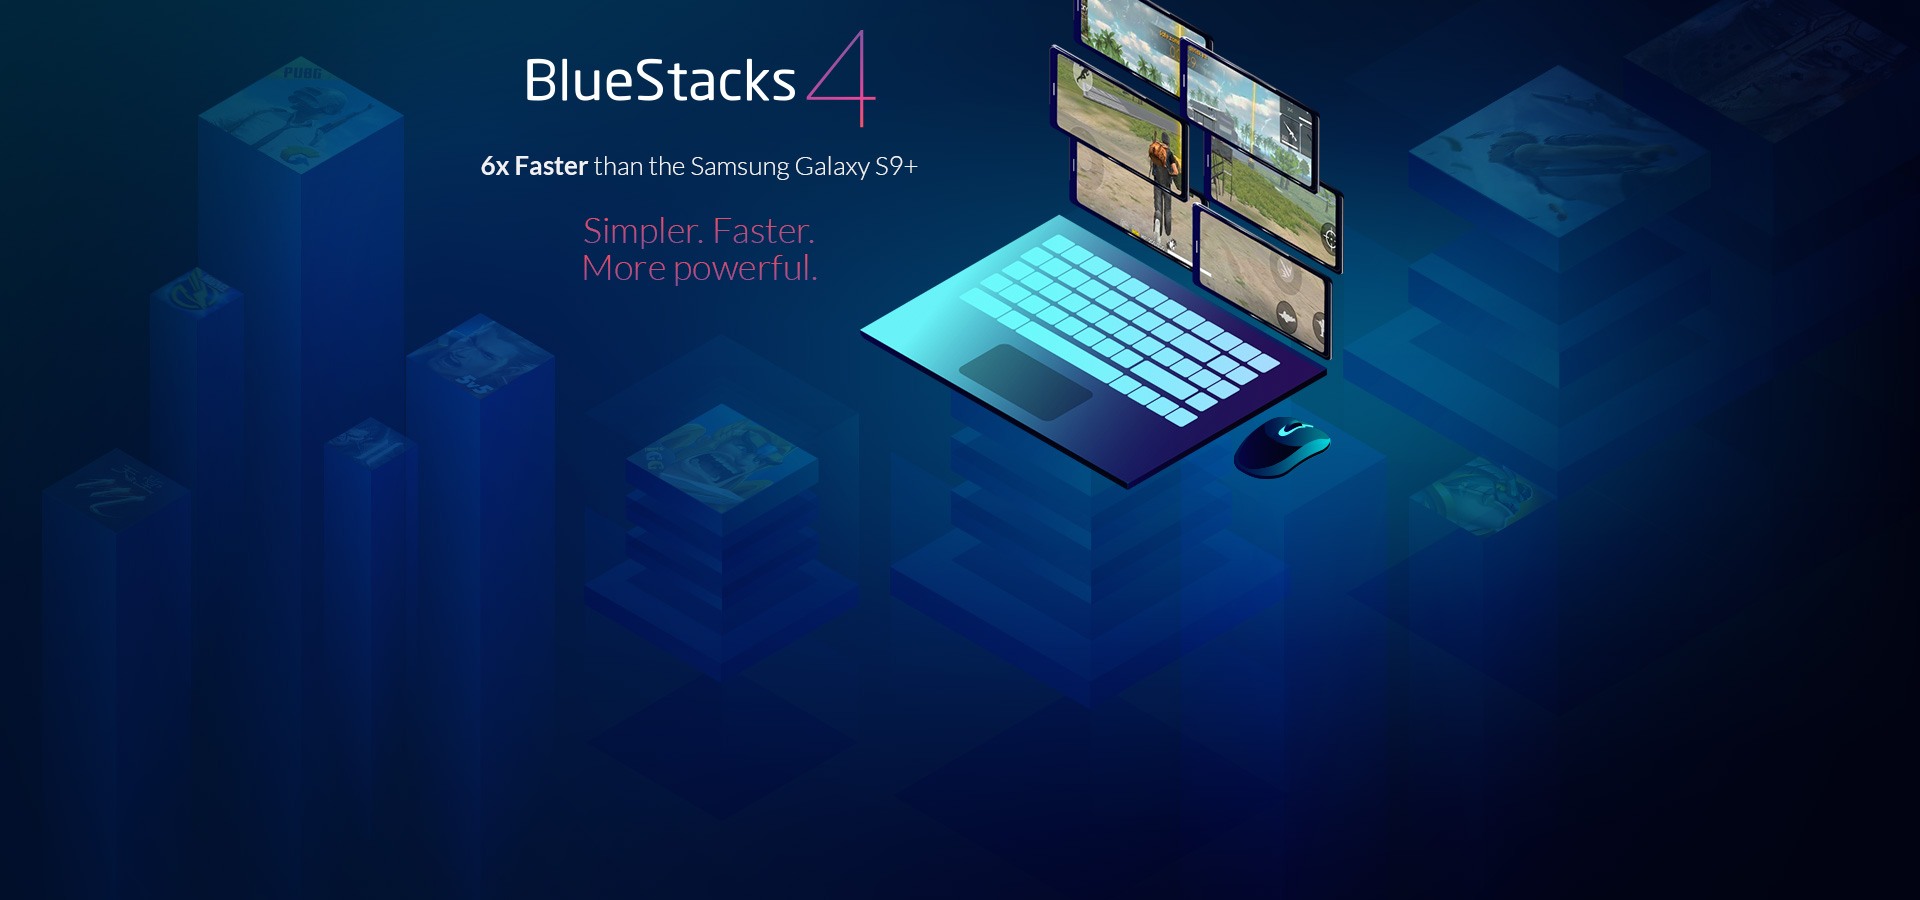 what android version is bluestacks 5